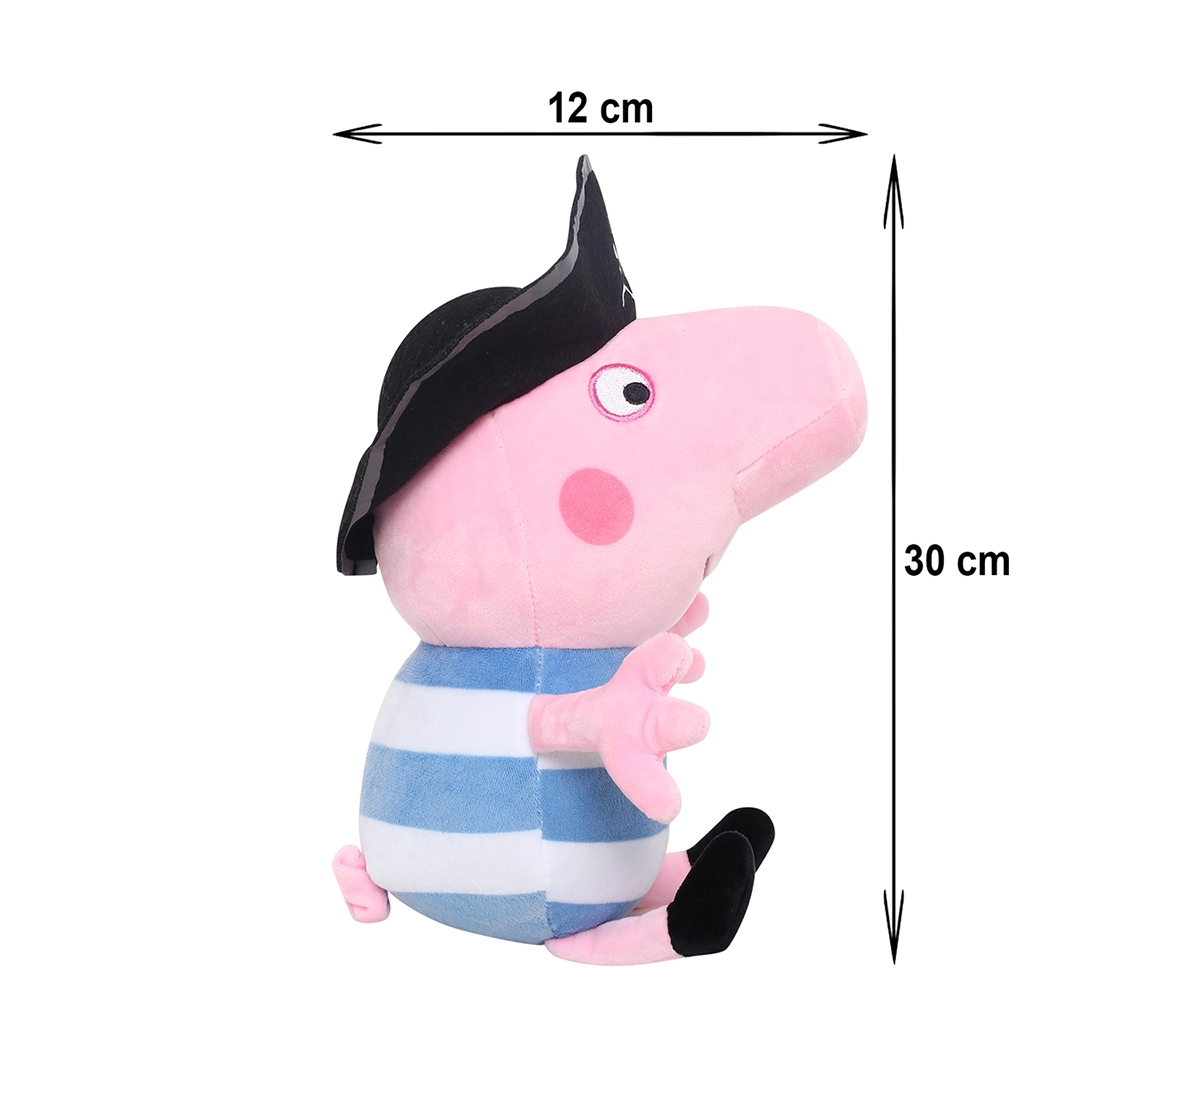 Peppa Pig | Peppa Pig In Pirate Costume Multi Color 30 Cm Soft Toy for Kids age 3Y+ - 30 Cm 4